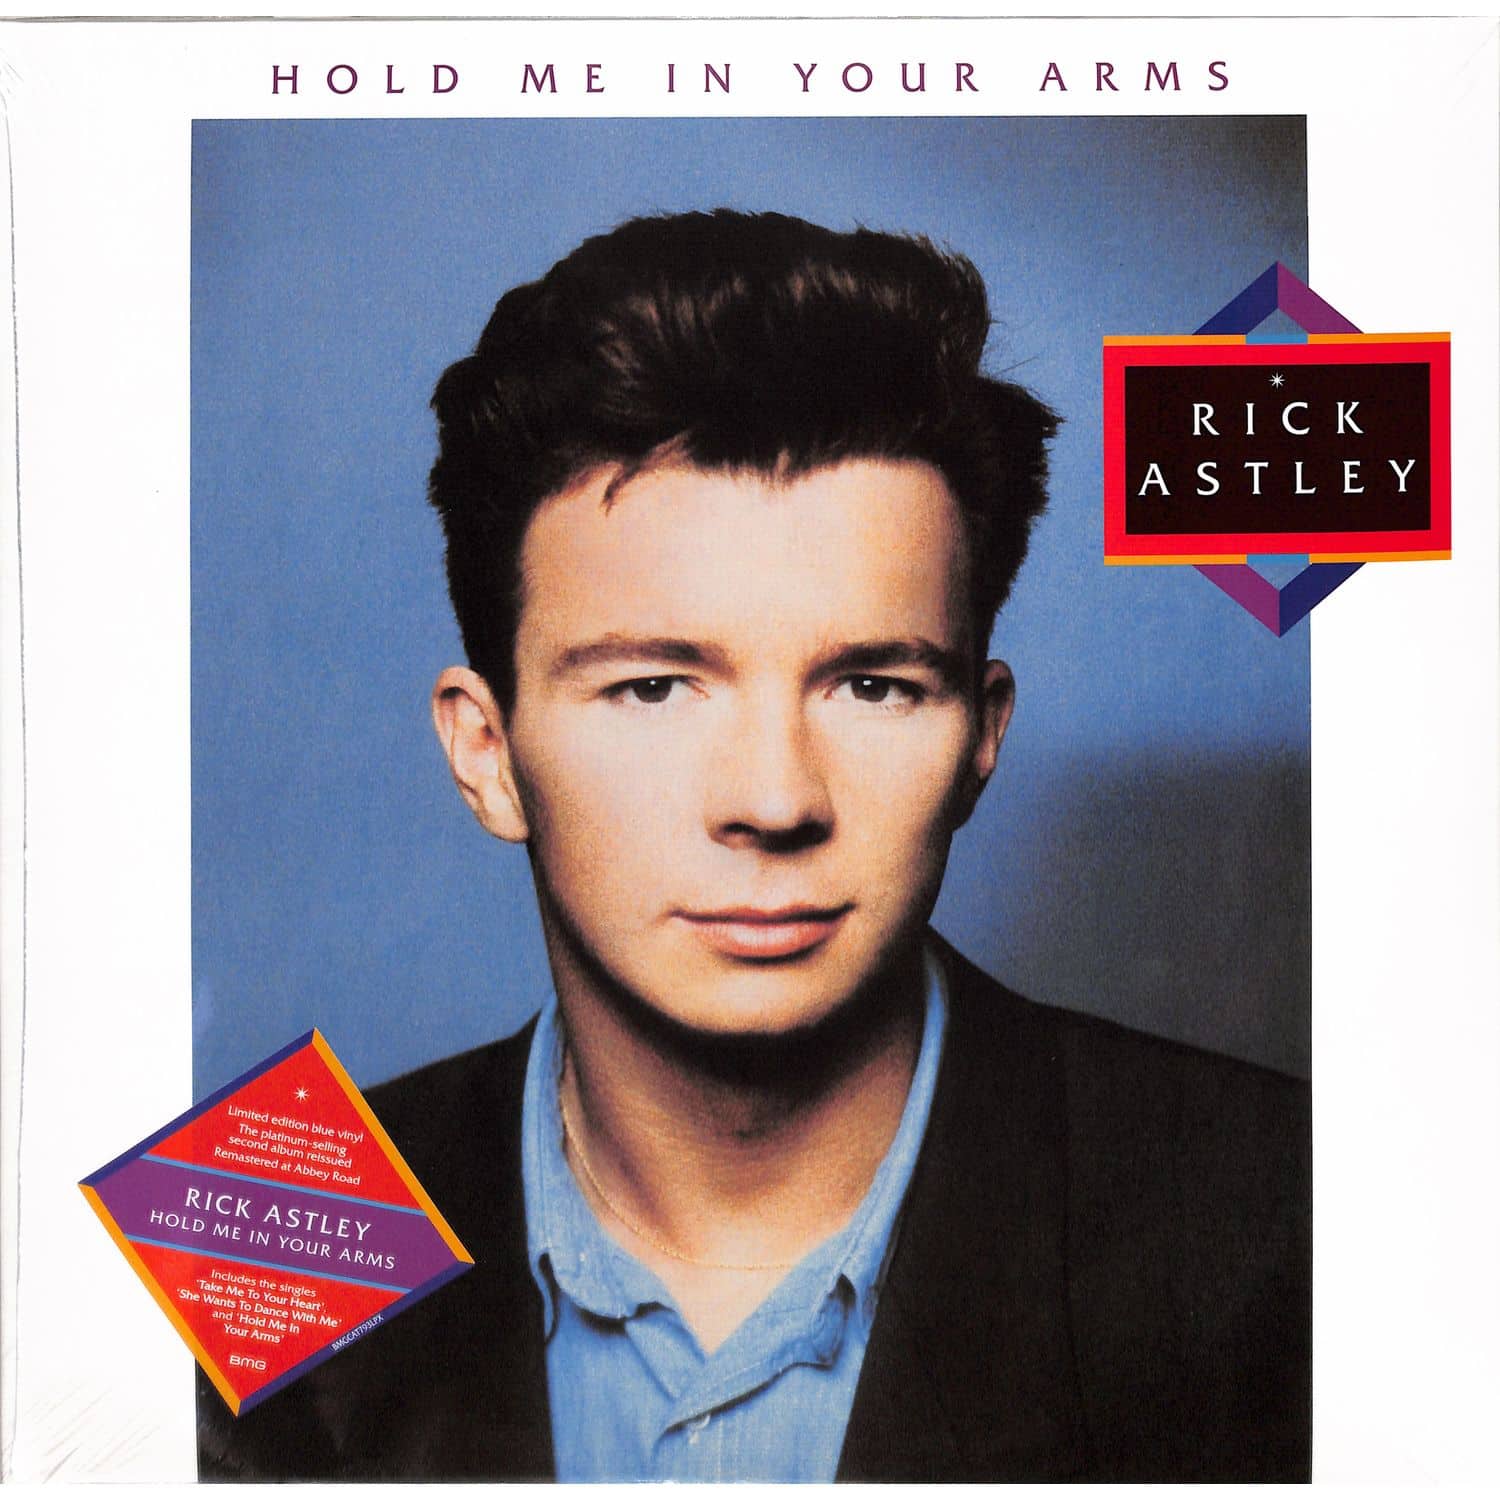 Rick Astley - HOLD ME IN YOUR ARMS 